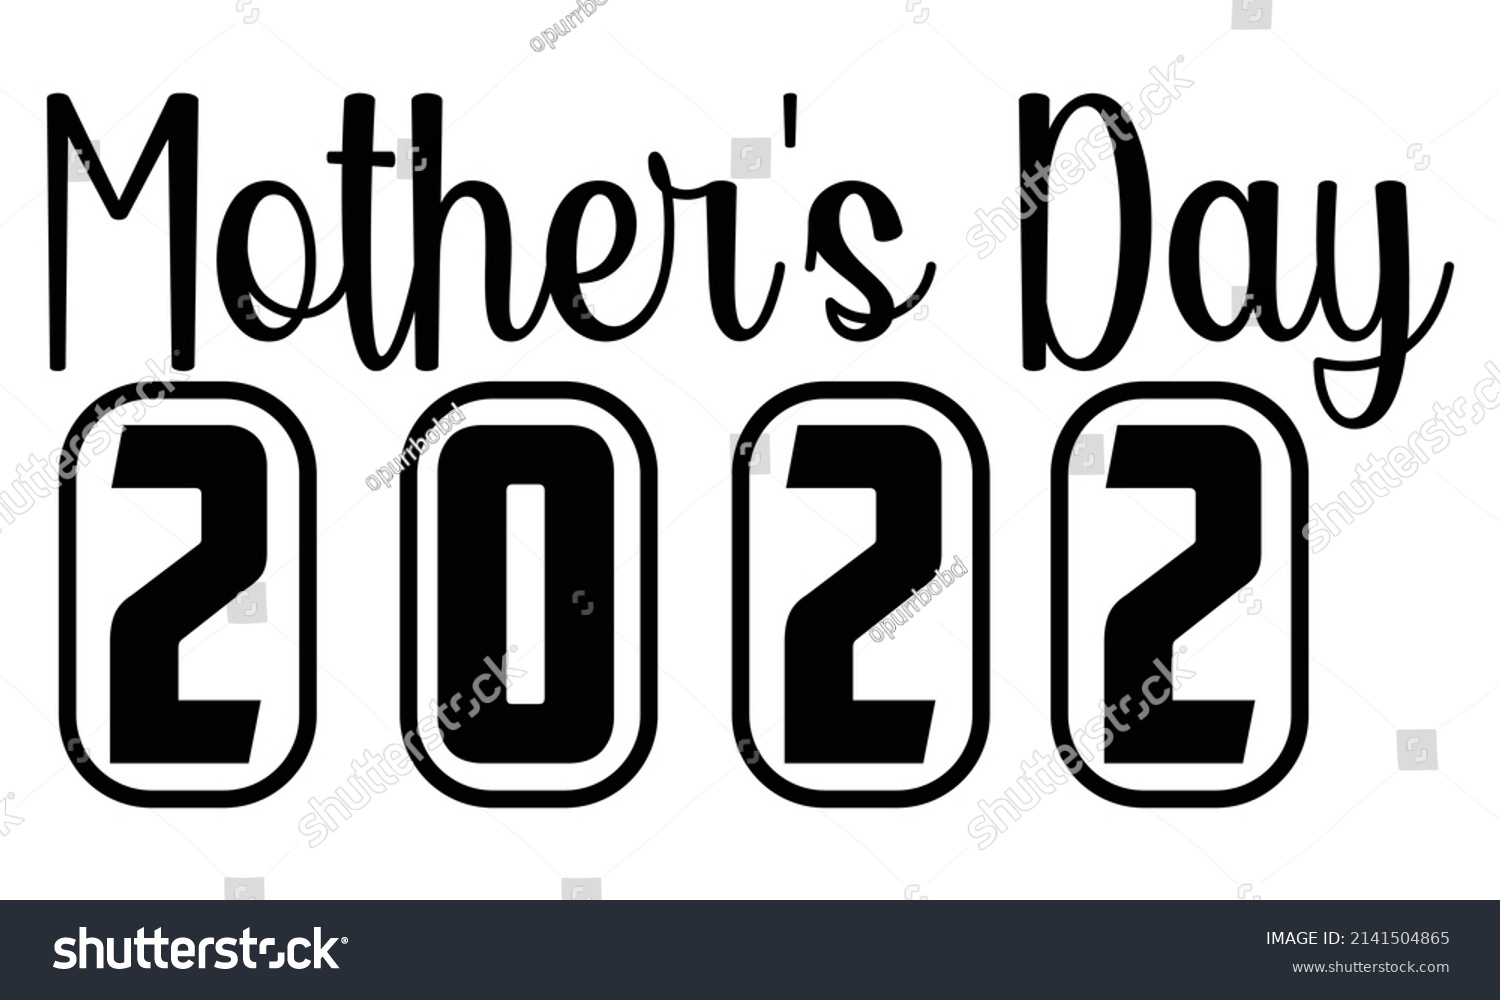 SVG of Mother's day 2022- Mother's day t-shirt design, Hand drawn lettering phrase, Calligraphy t-shirt design, Isolated on white background, Handwritten vector sign, SVG, EPS 10 svg